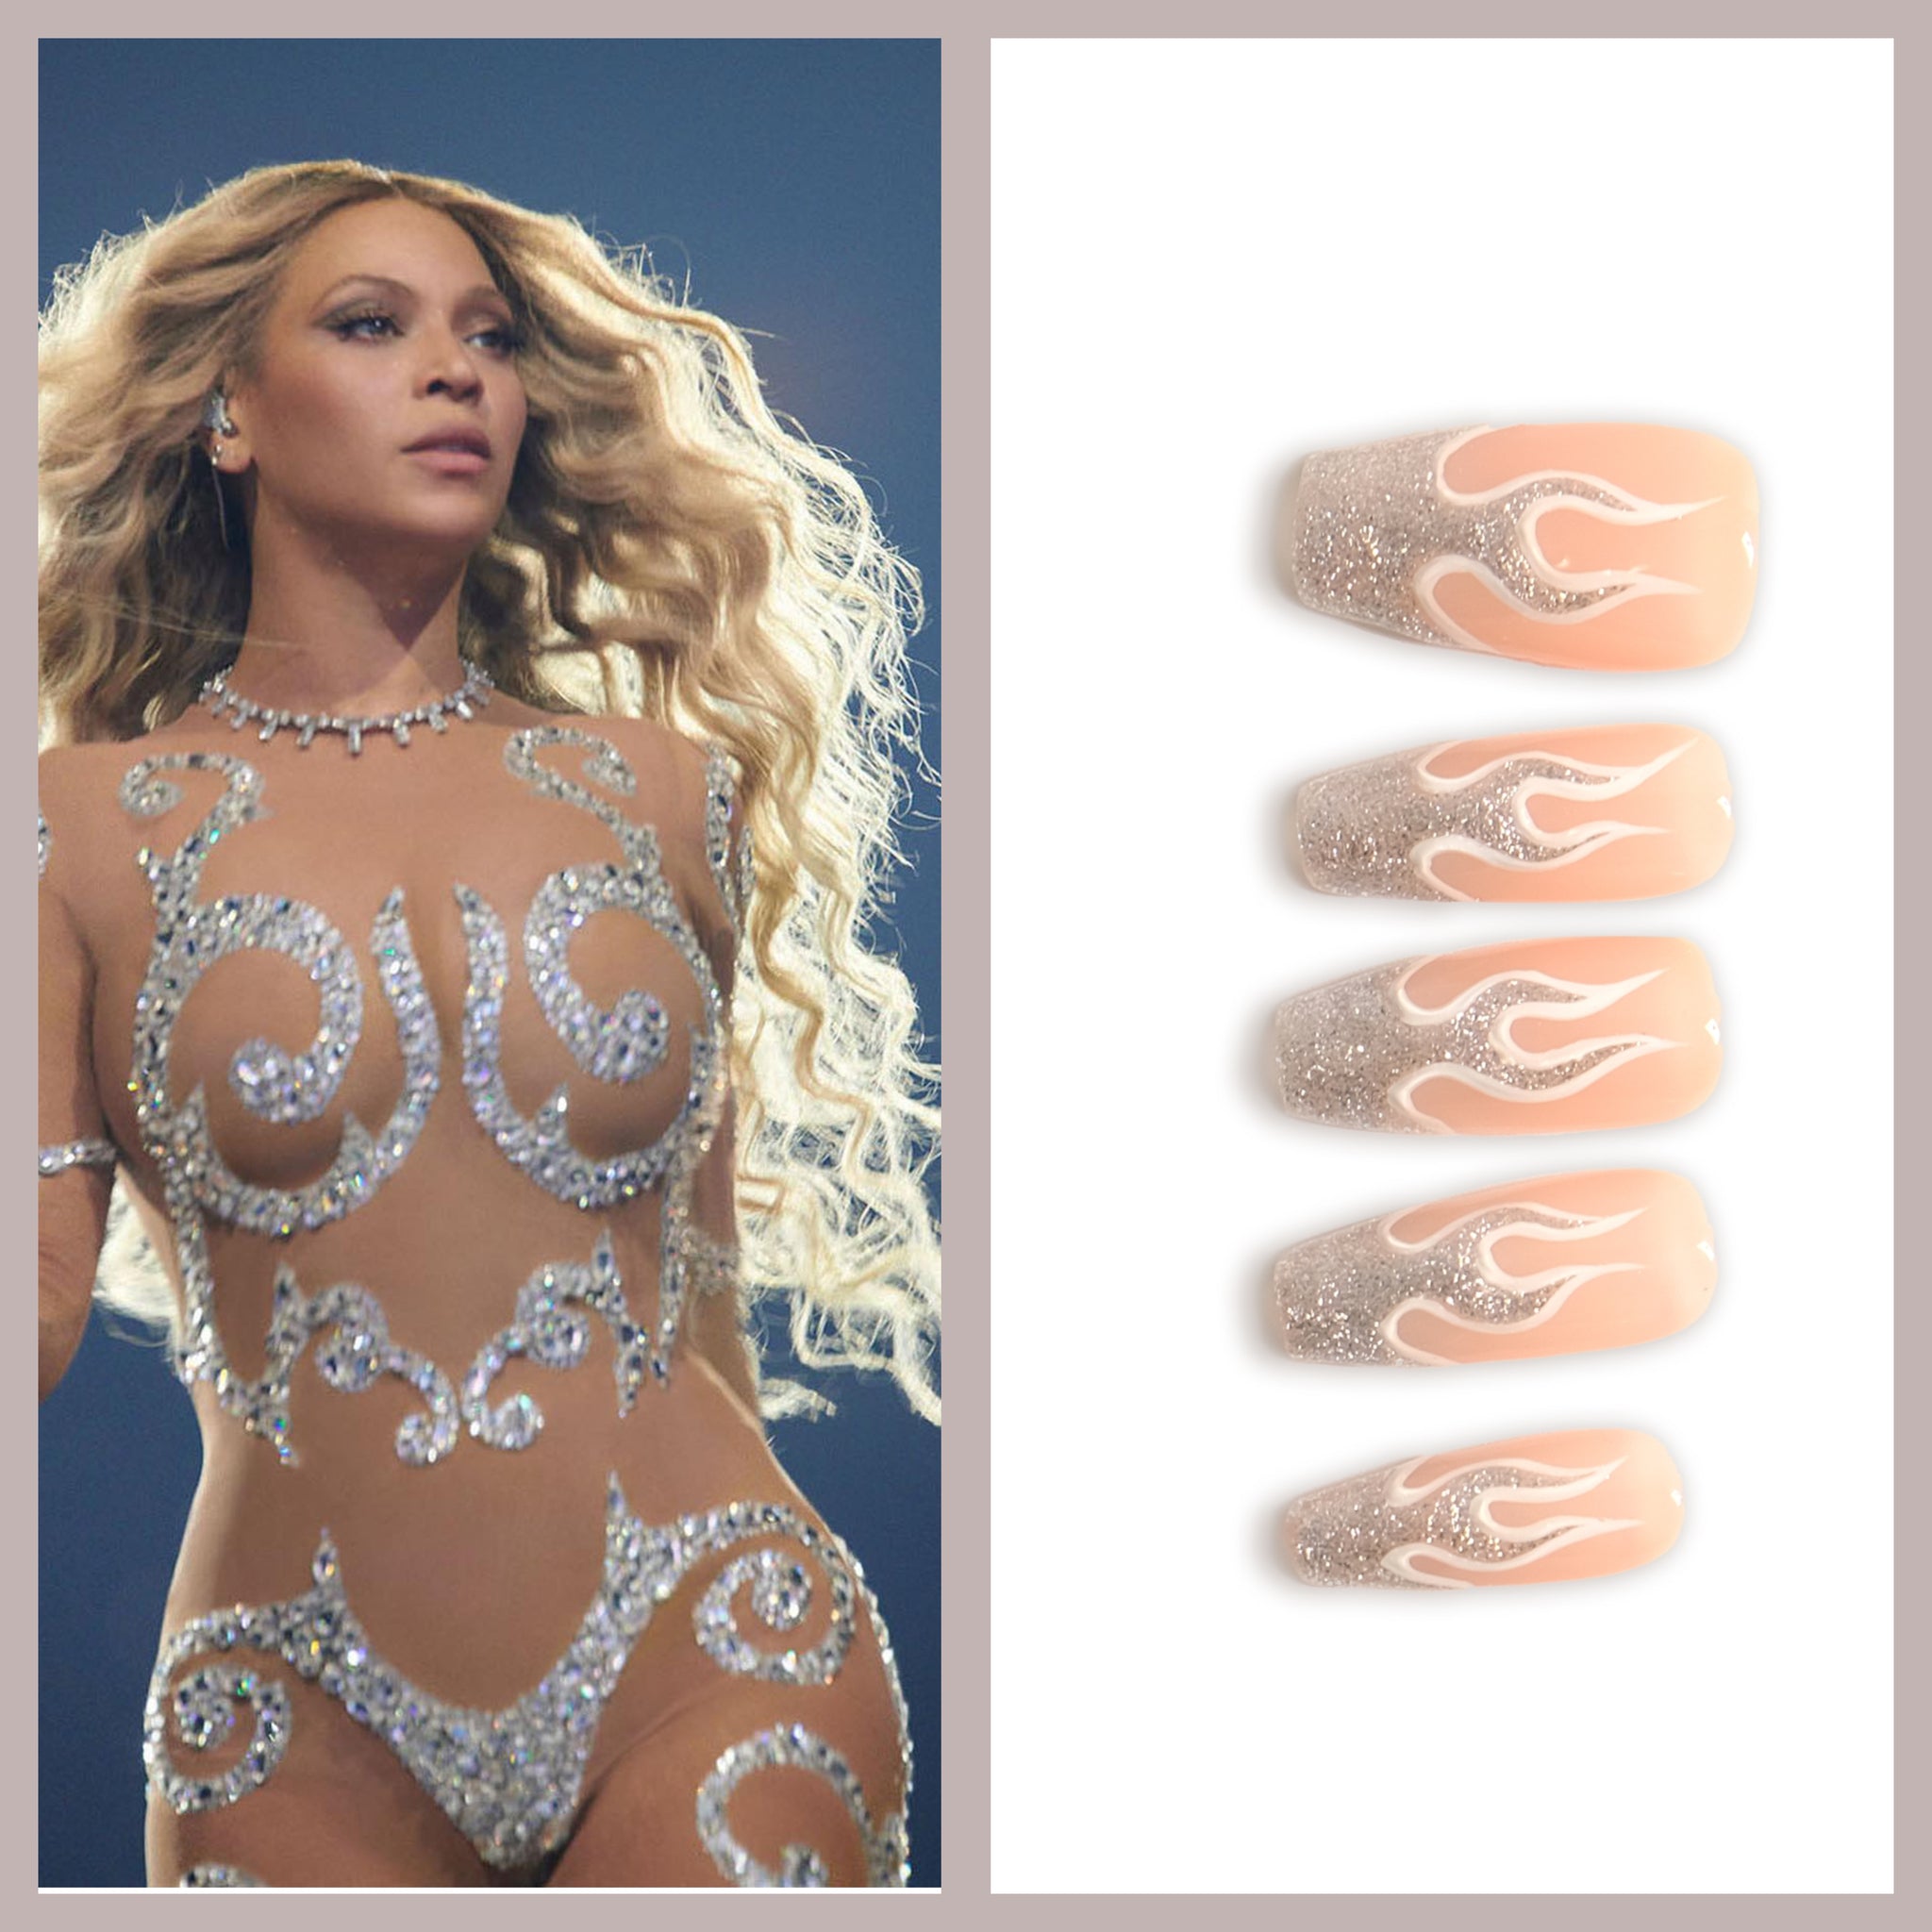 Beyoncé's Sizzling Sheer Outfit Complements Our Flame Nail Art Pattern Perfectly!